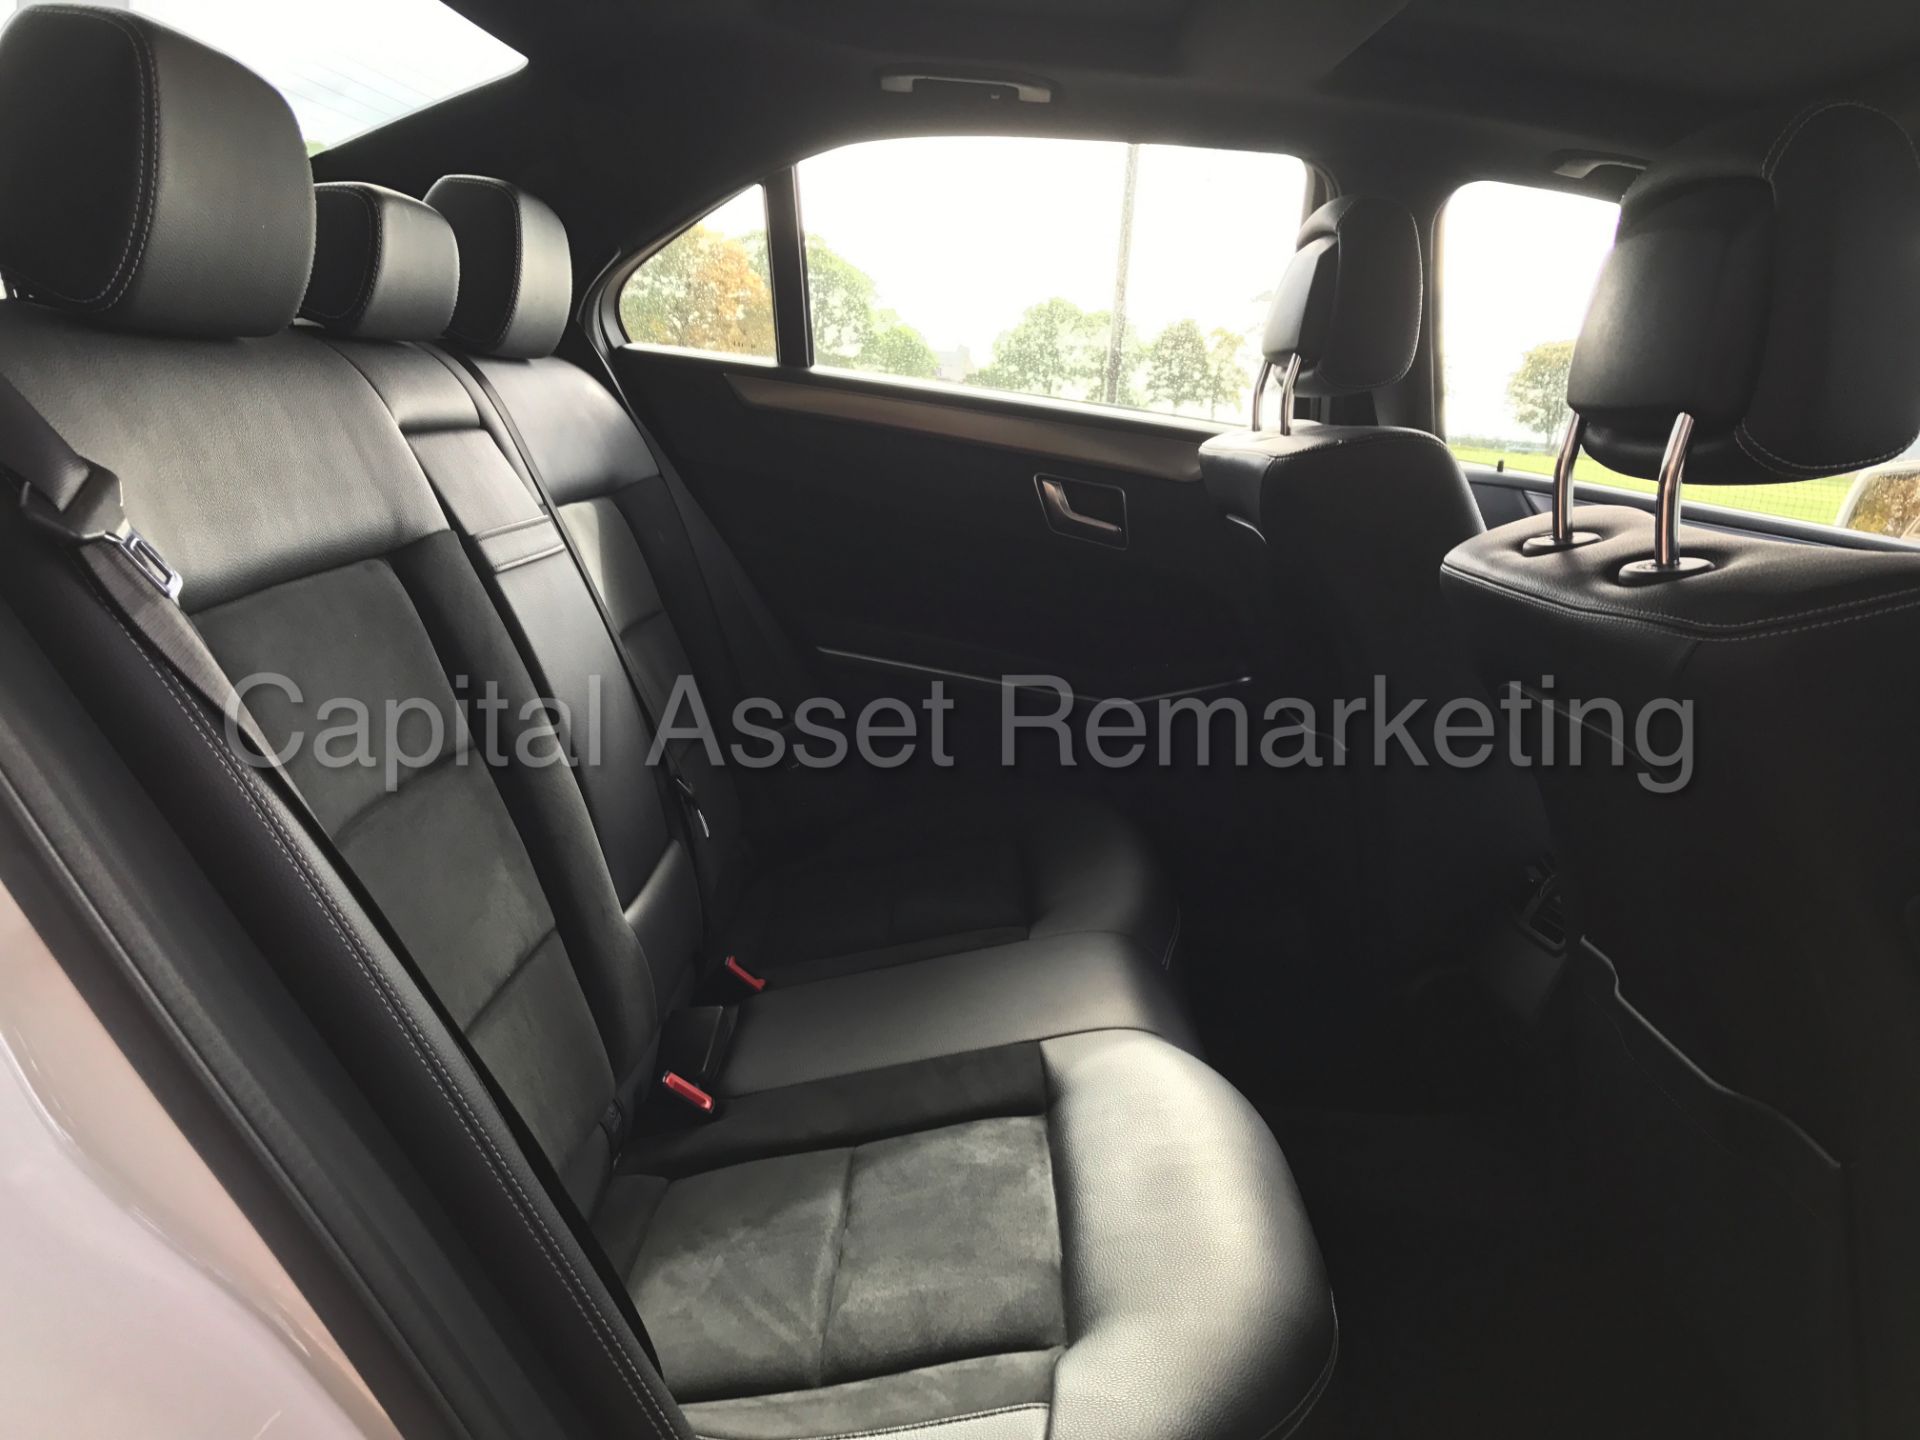 MERCEDES-BENZ E220 'AMG SPORT' (2015 MODEL) 'SALOON - AUTO - PAN ROOF - SAT NAV - LEATHER' *LOOK* - Image 27 of 33